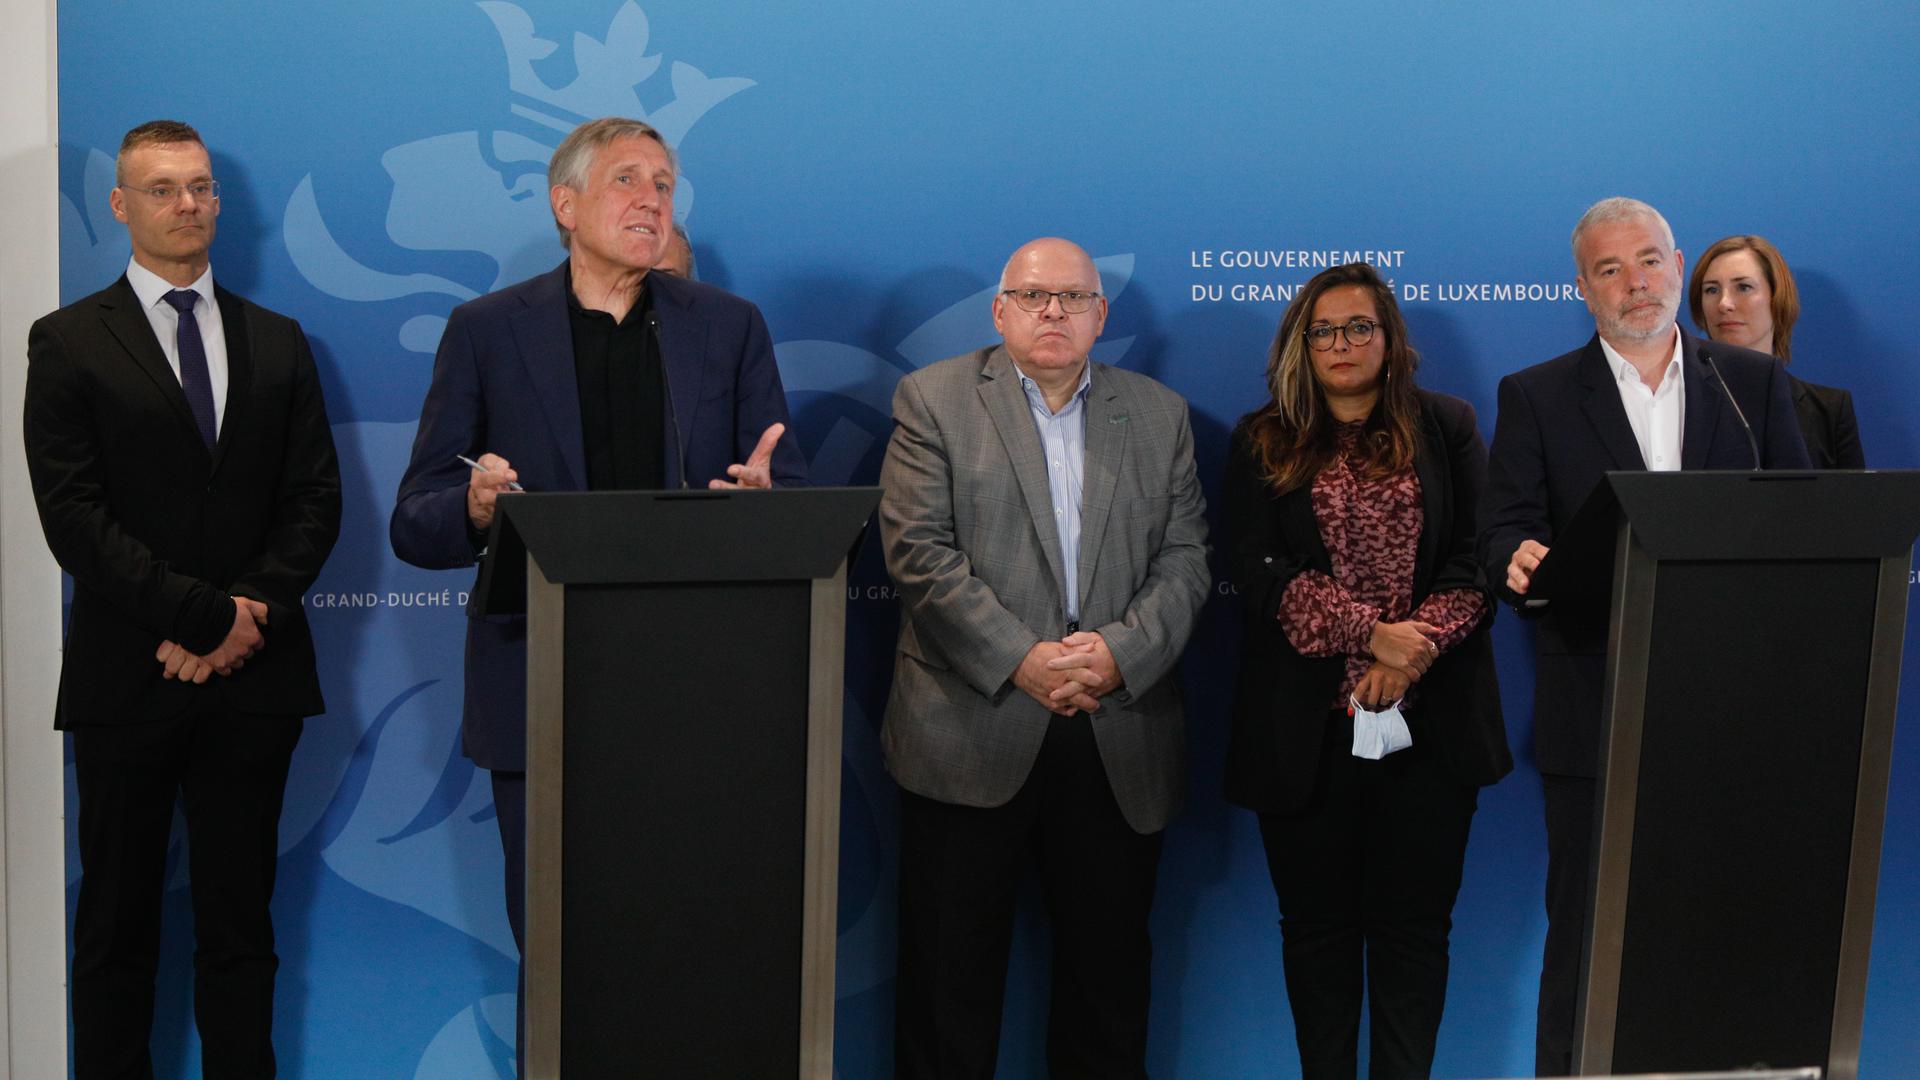 Luxair CEO Gilles Feith (left) and Transport Minister François Bausch (second from left) speak as a news conference on Tuesday about the airline shedding more jobs also attended by labour union leaders and Labour Minister Dan Kersch (second from right)